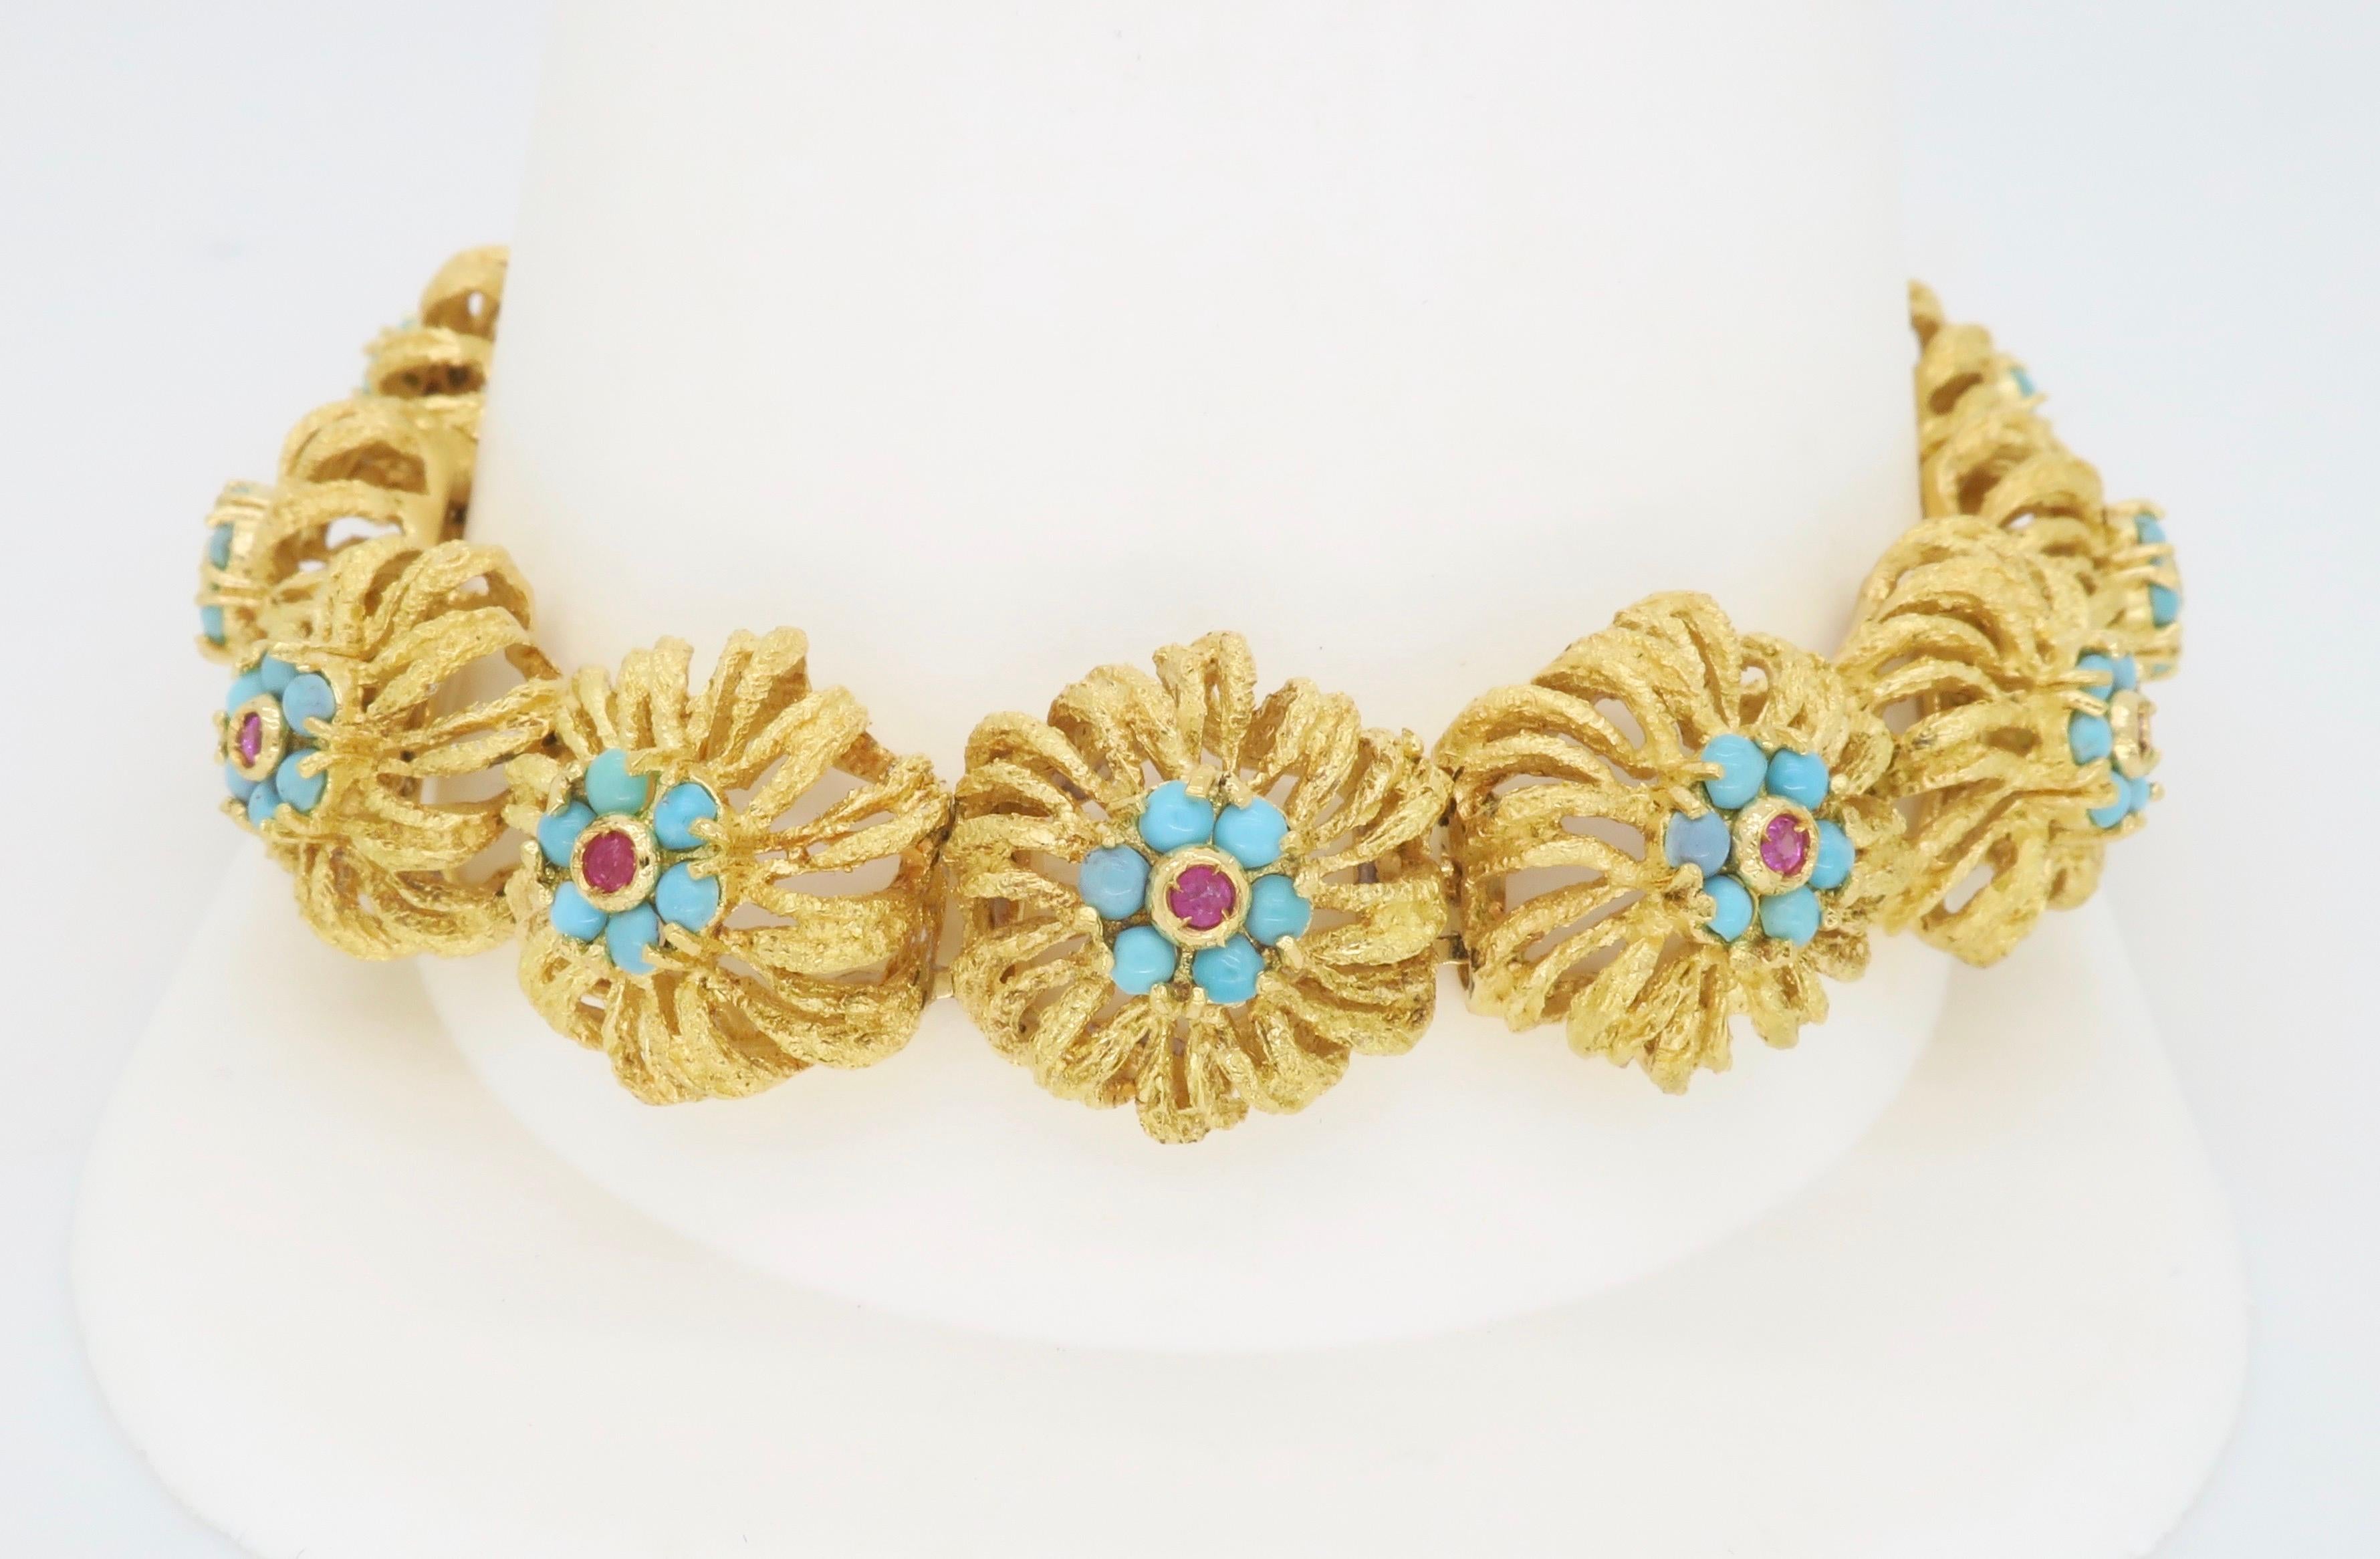 Intricate floral design Ruby & Turquoise bracelet made in 18k yellow gold.

Gemstone: Ruby & Turquoise 
Metal: 18k Yellow Gold 
Bracelet Length: 8